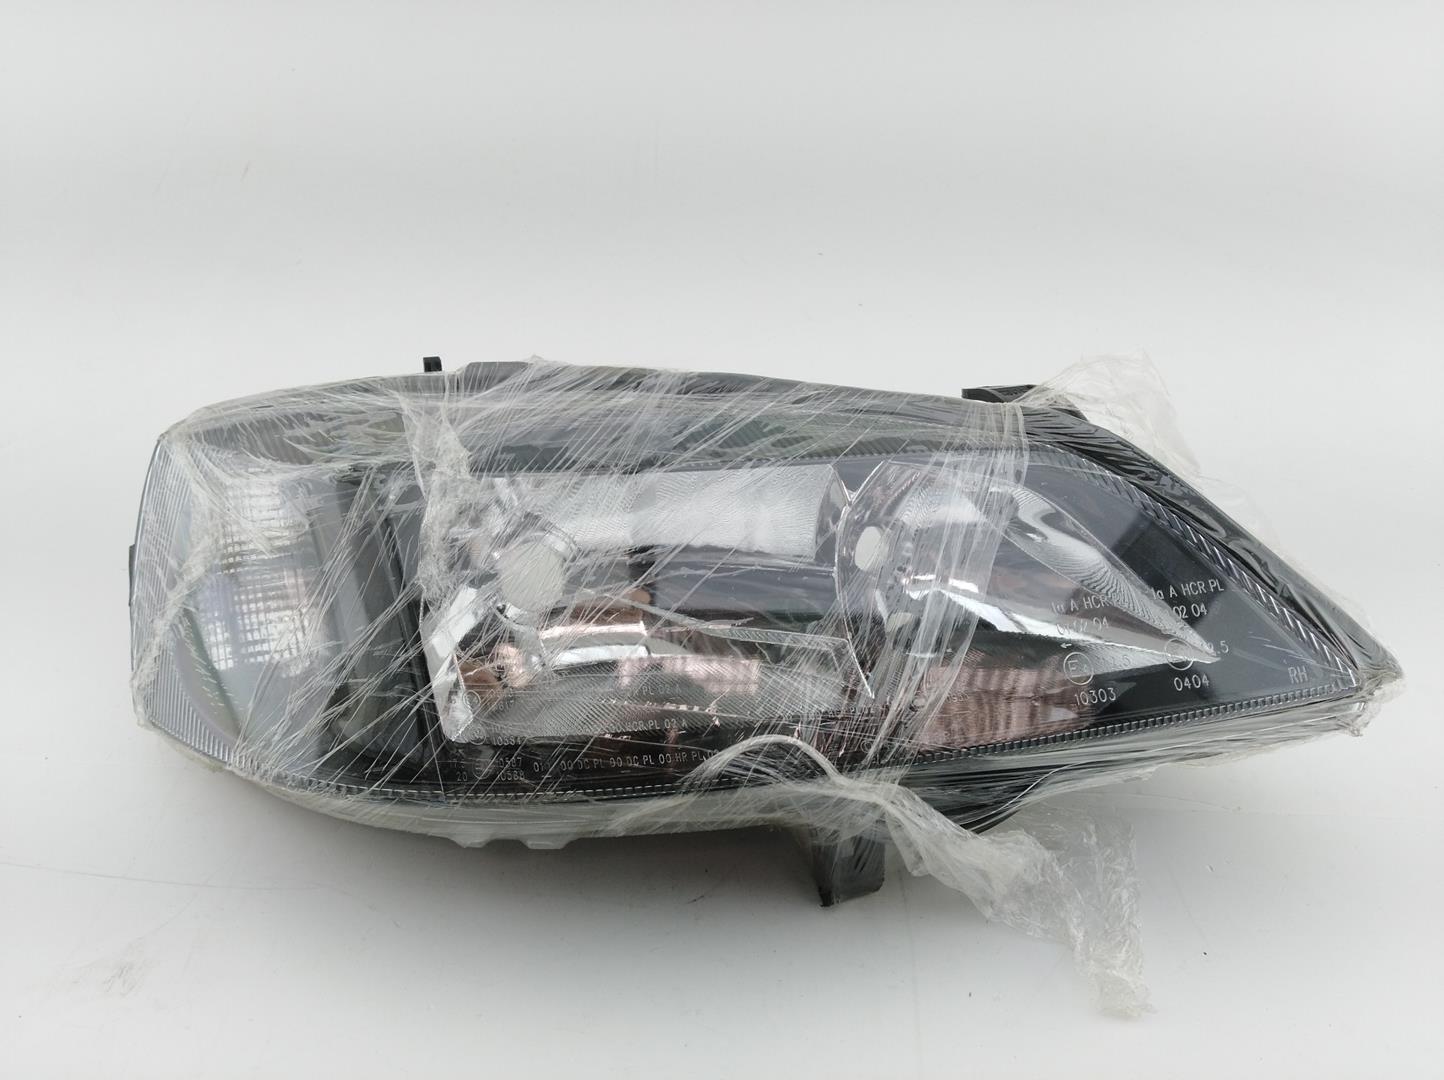 OPEL Astra H (2004-2014) Front Right Headlight 101.16211007, 101.16211007, 101.16211007 24665022